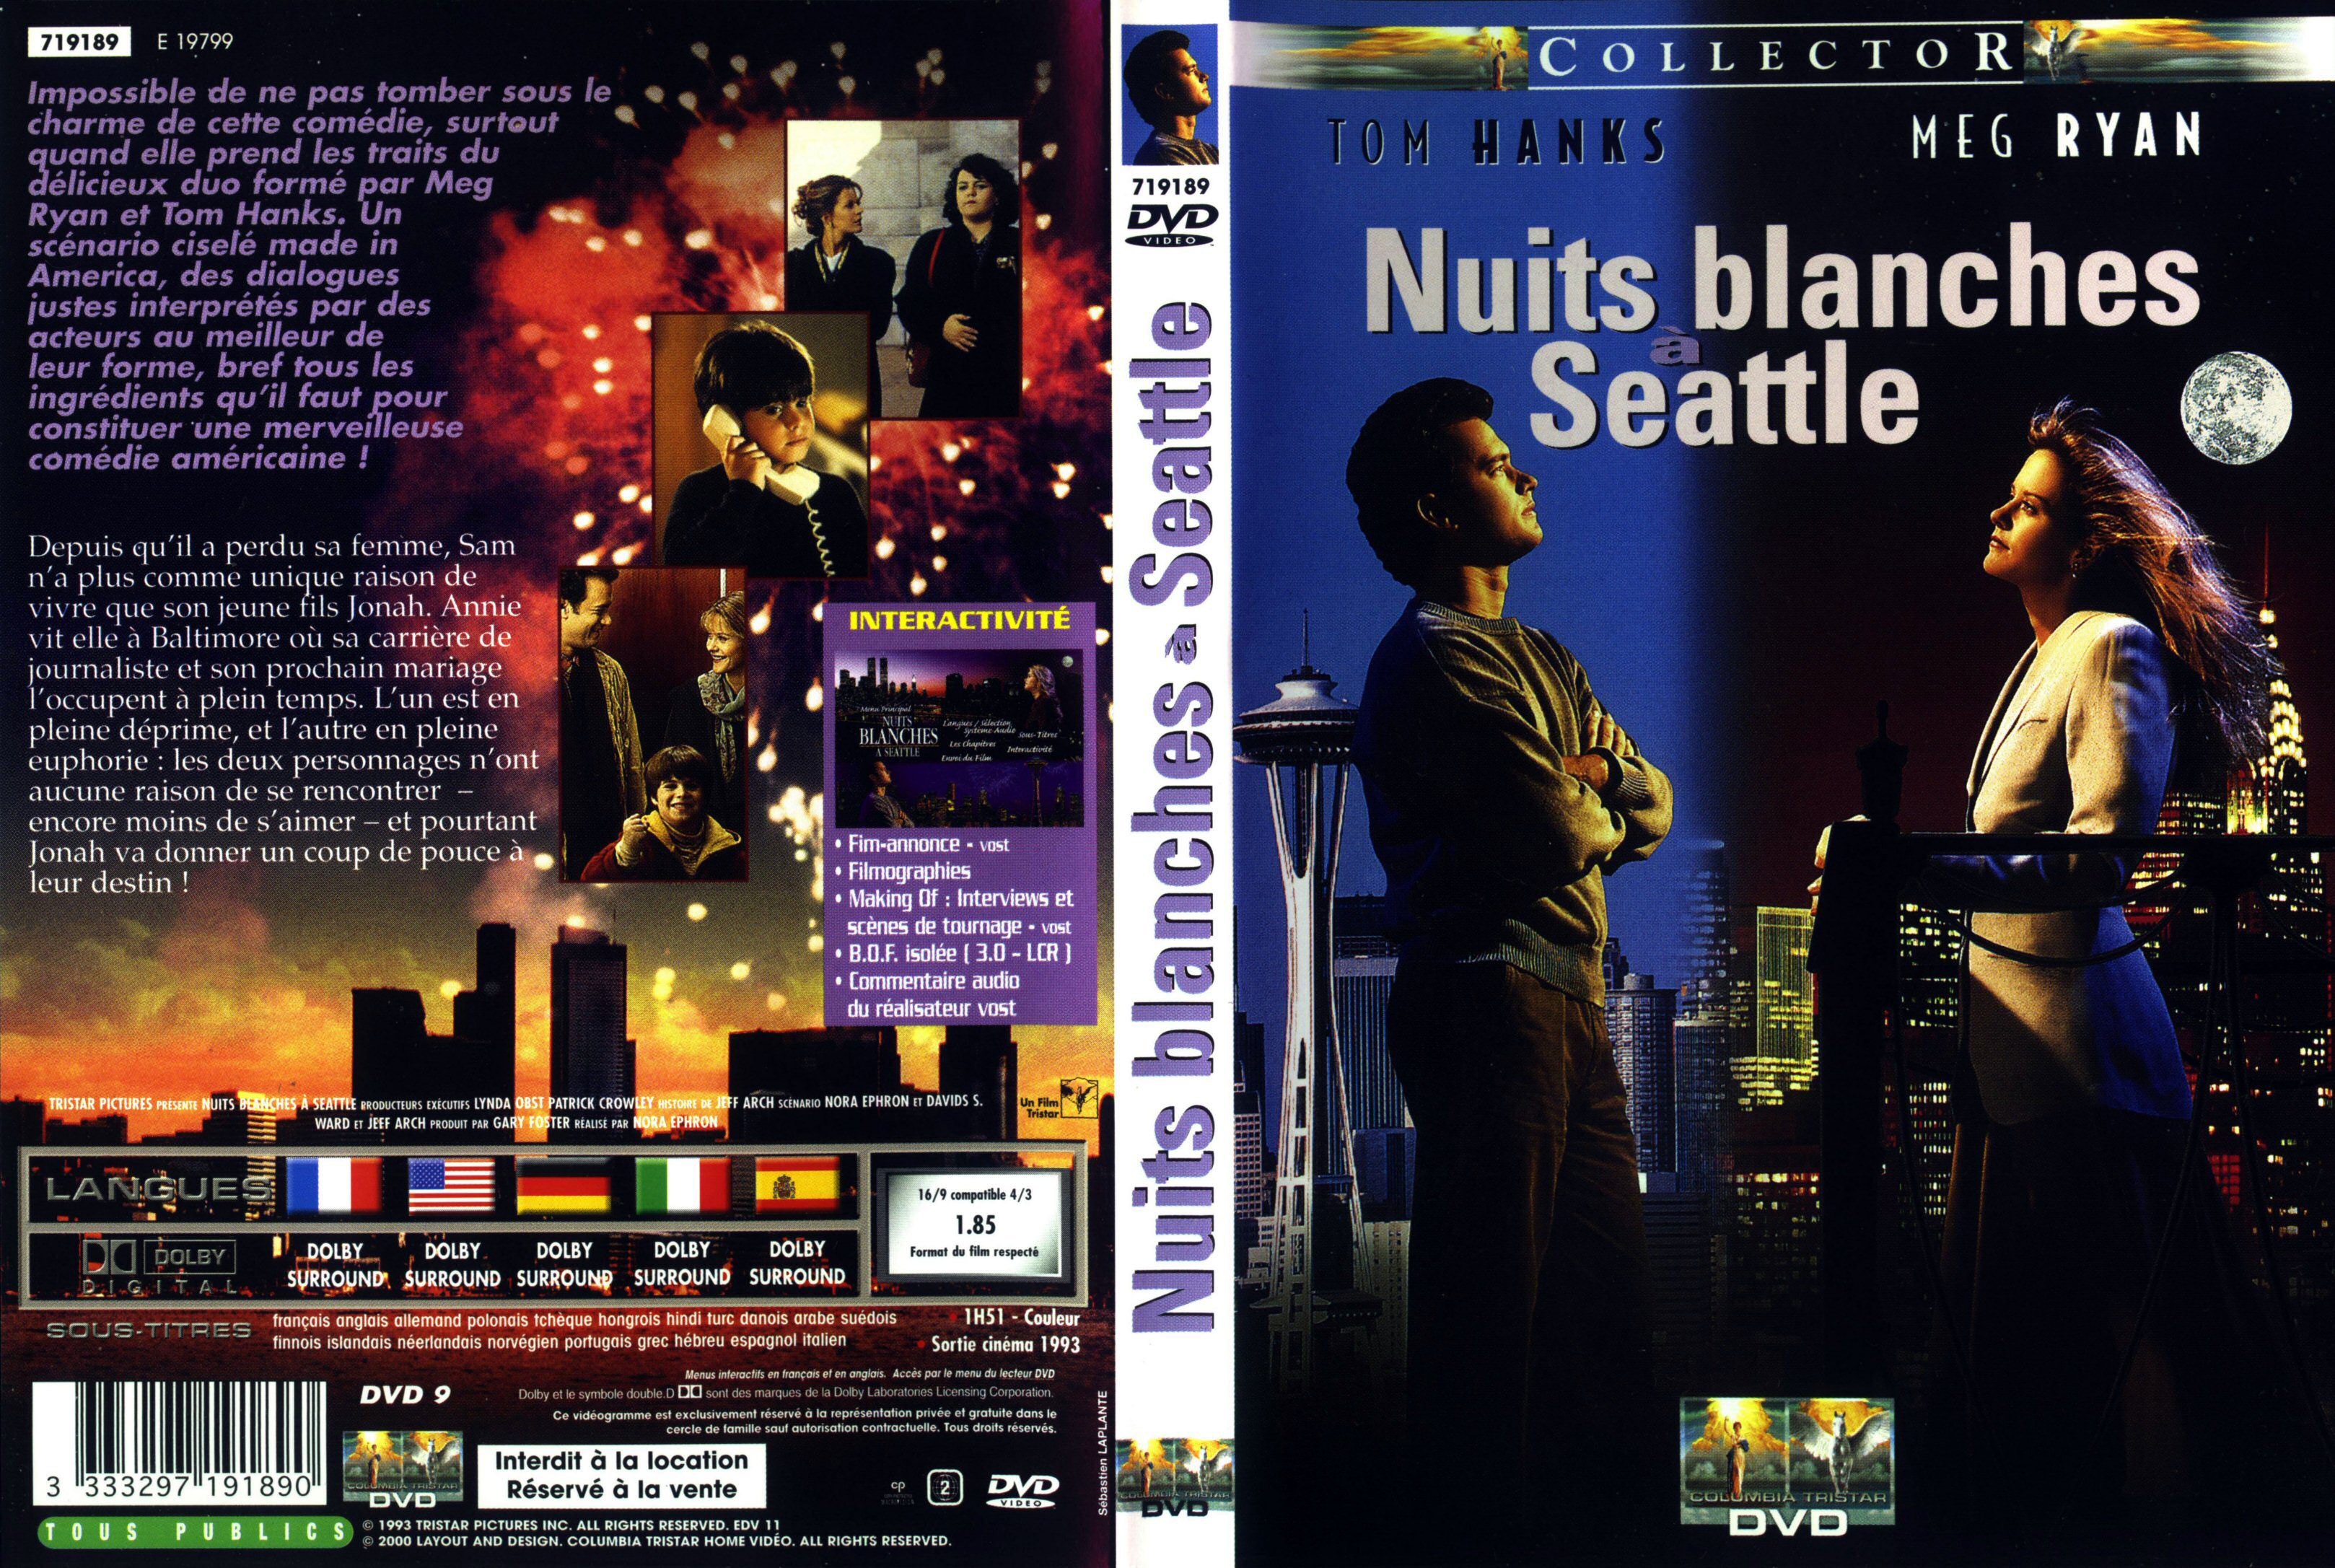 Jaquette DVD Nuits blanches  Seattle